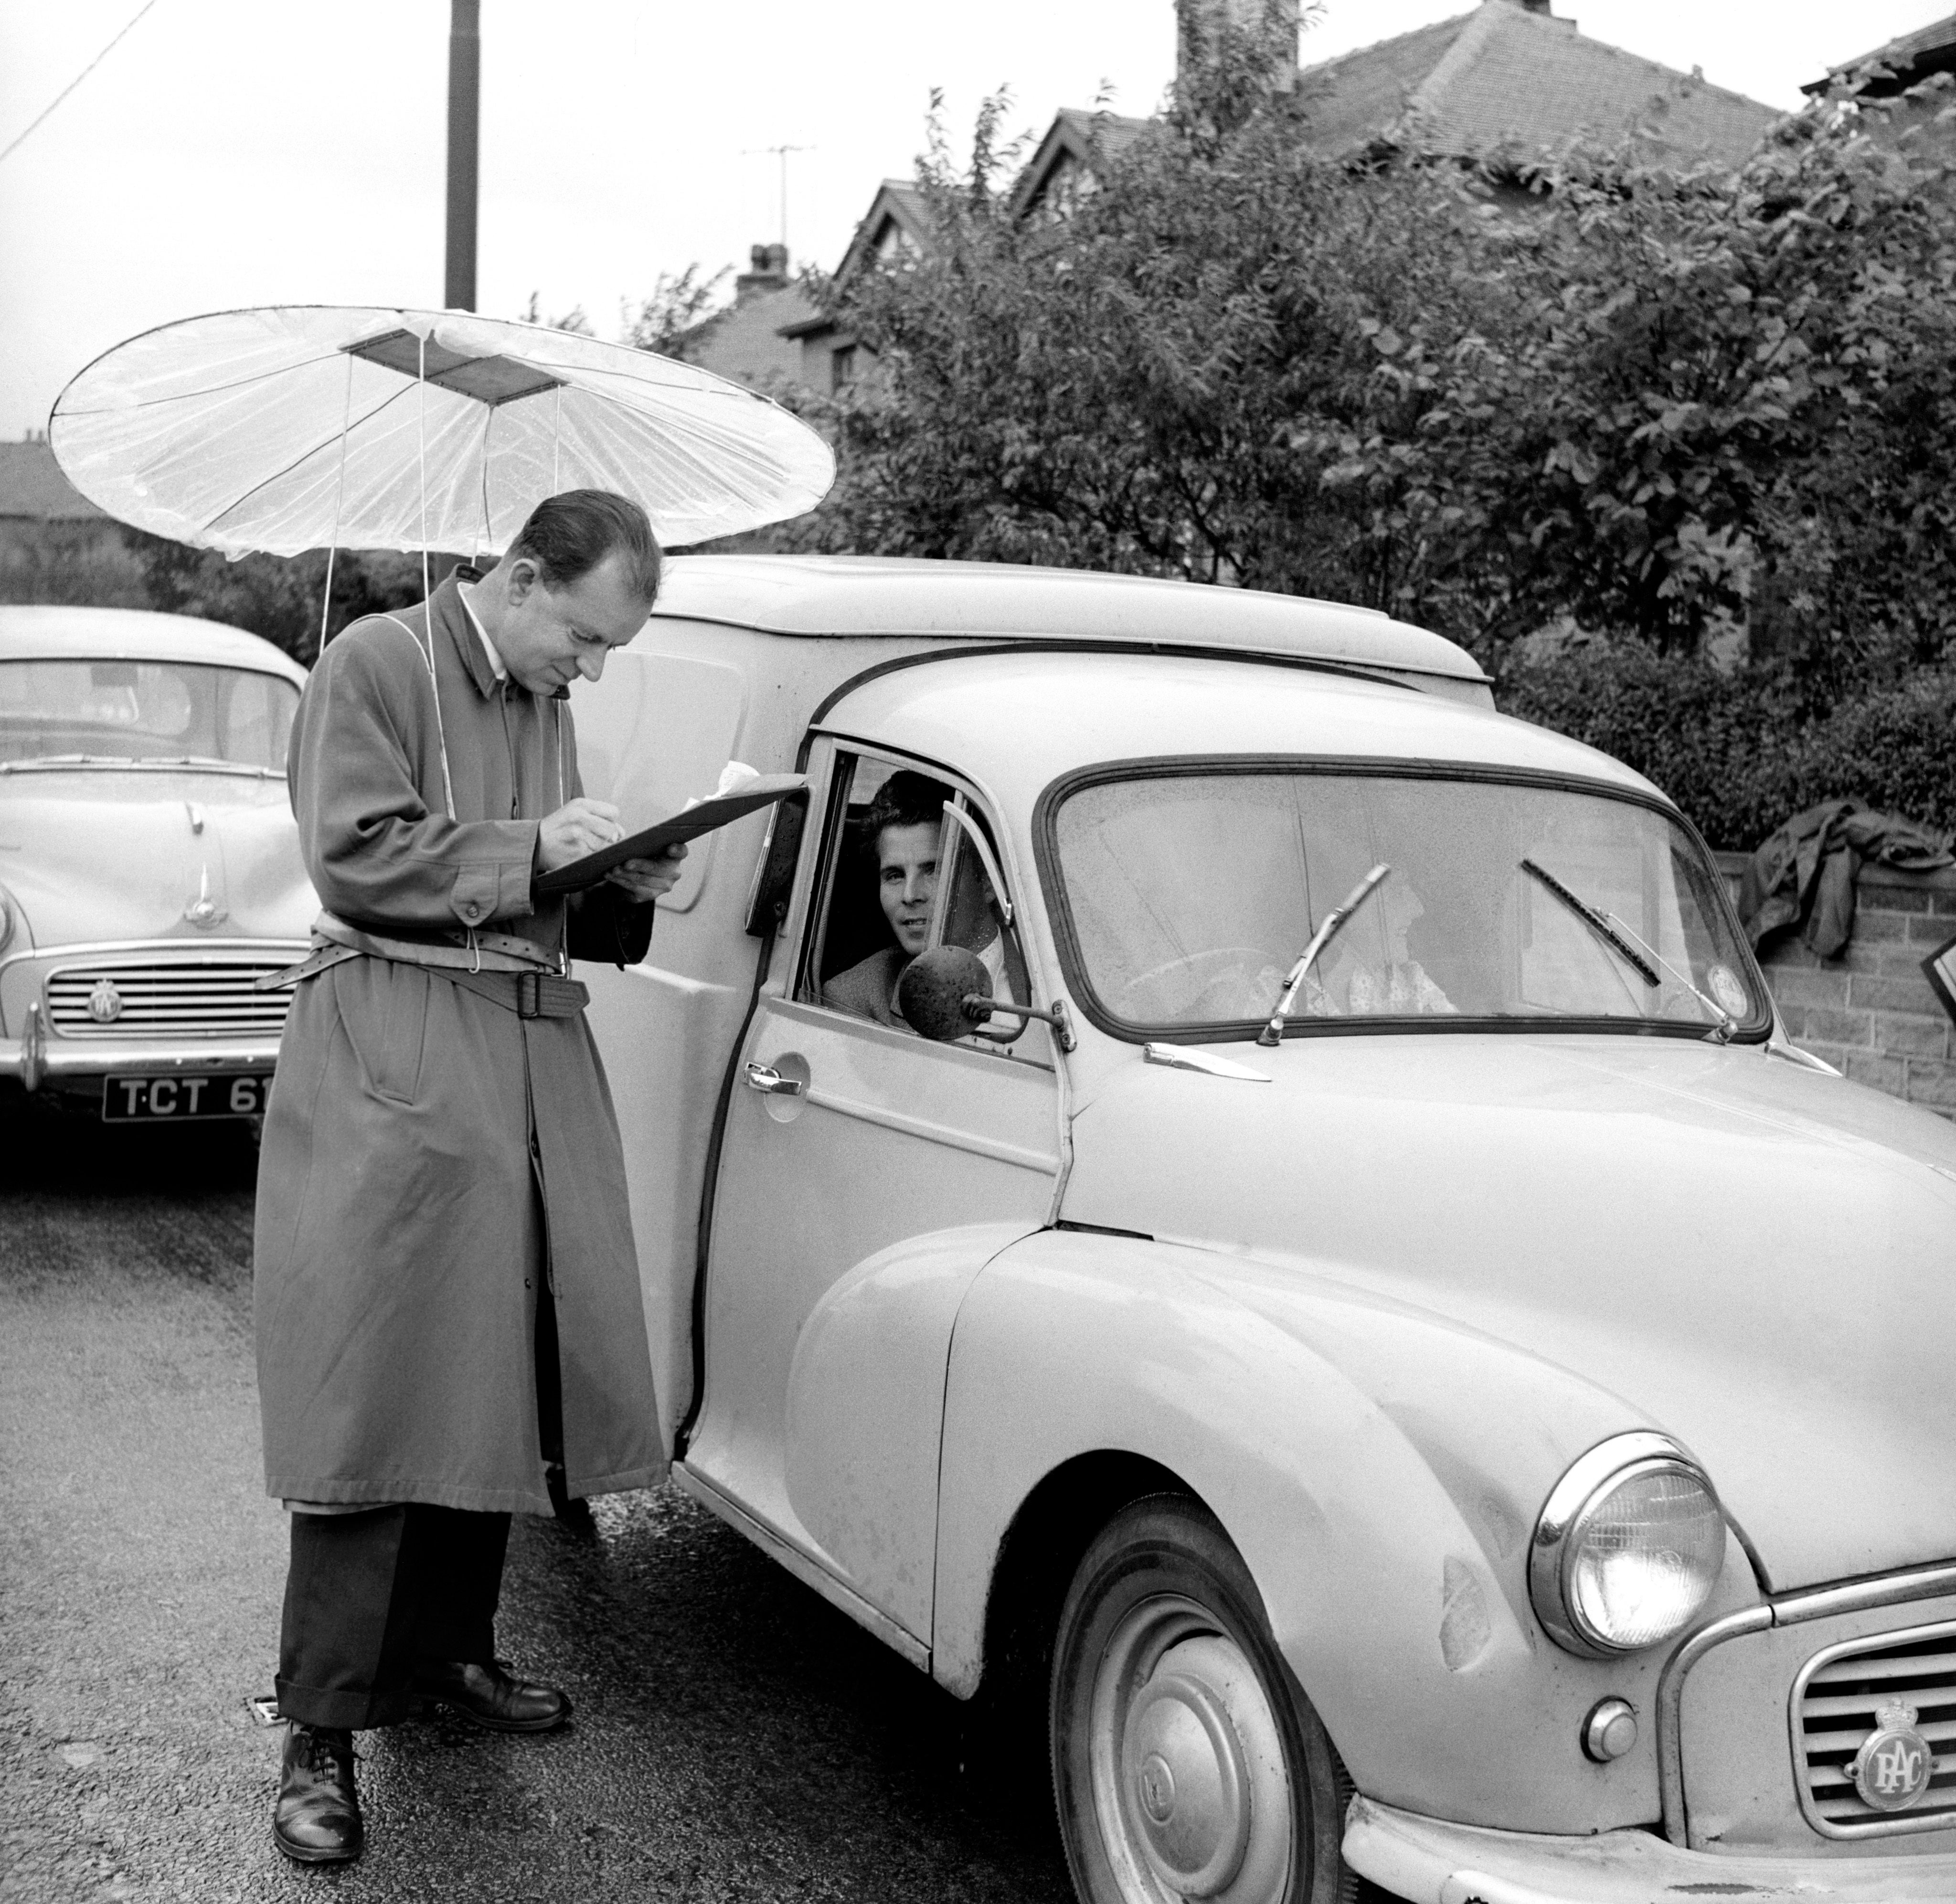 A man collects census answers at a checkpoint in Dalton, Yorkshire, six decades ago